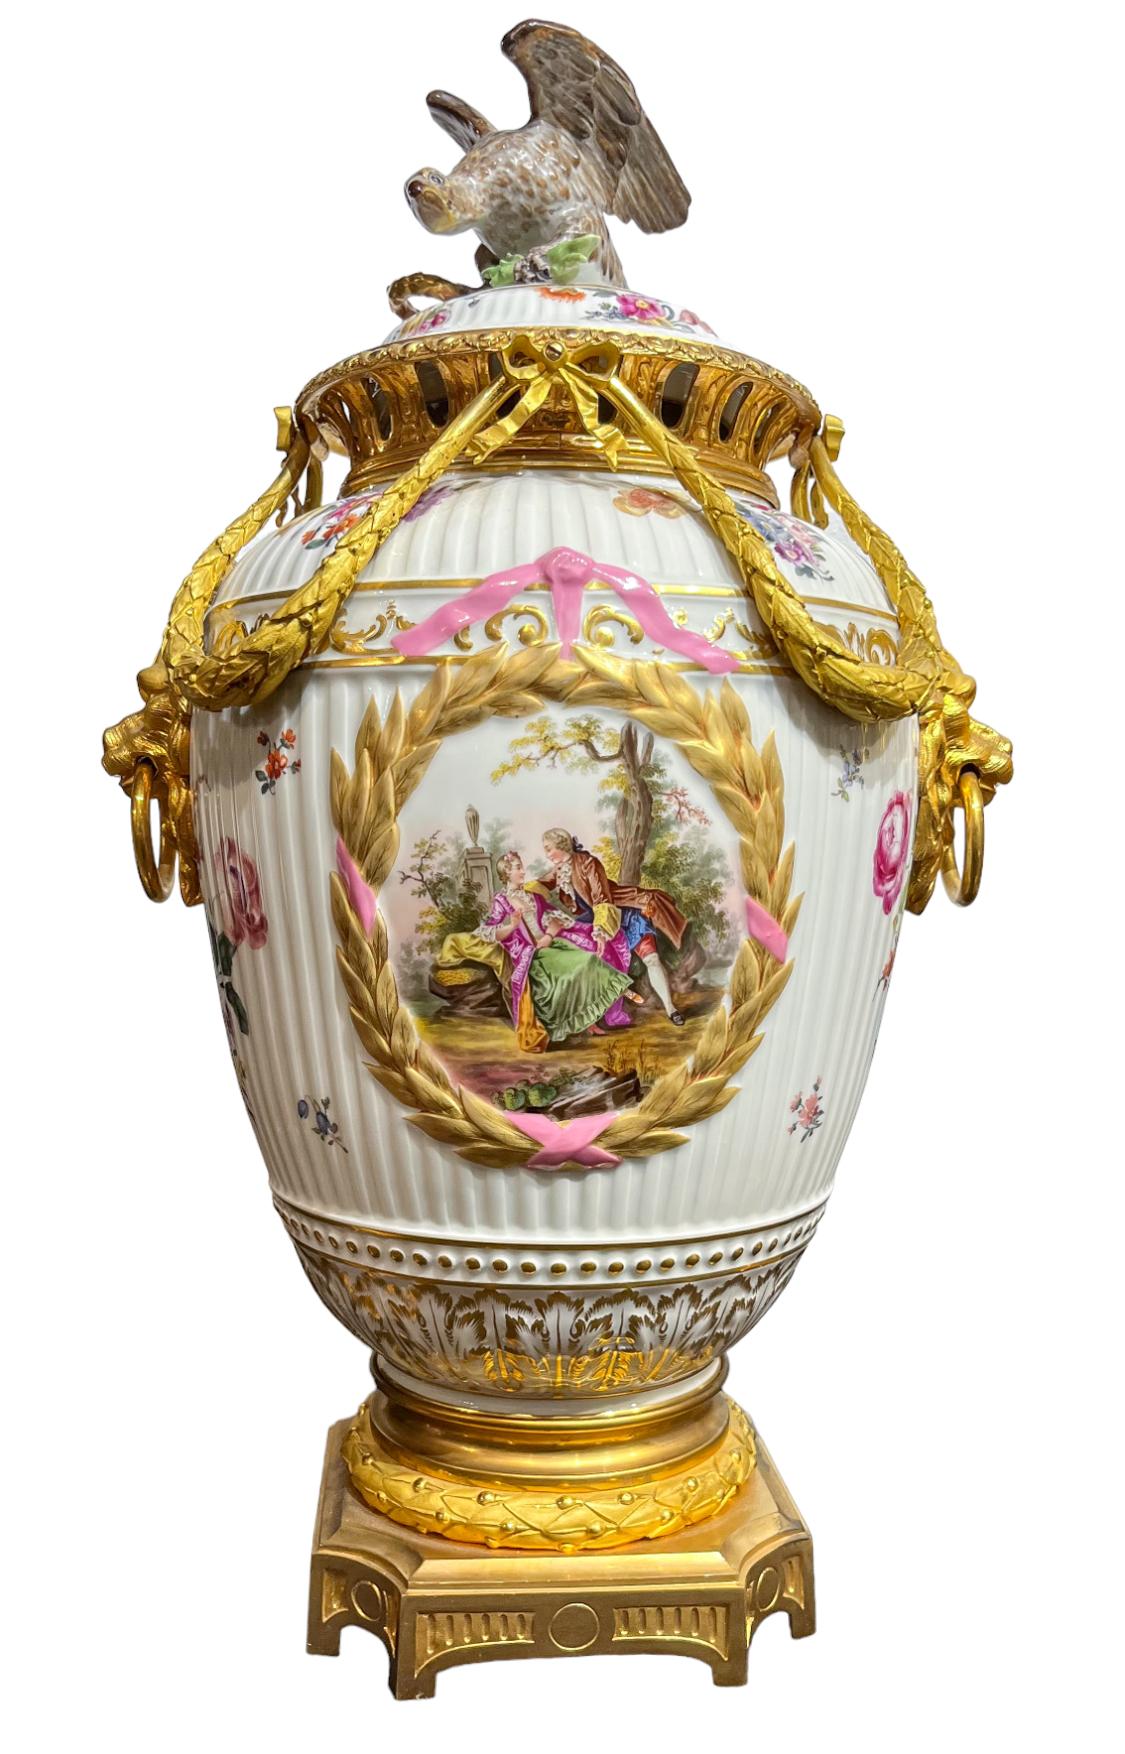 This fine pair of ribbed porcelain vases or Potpourri vases are based on a Berlin Kannelierte Porpourri pair. Hand painted in Austria, the pair were sent to France for the gilt bronze laurel wreaths, and lion mask handles, as the french were the